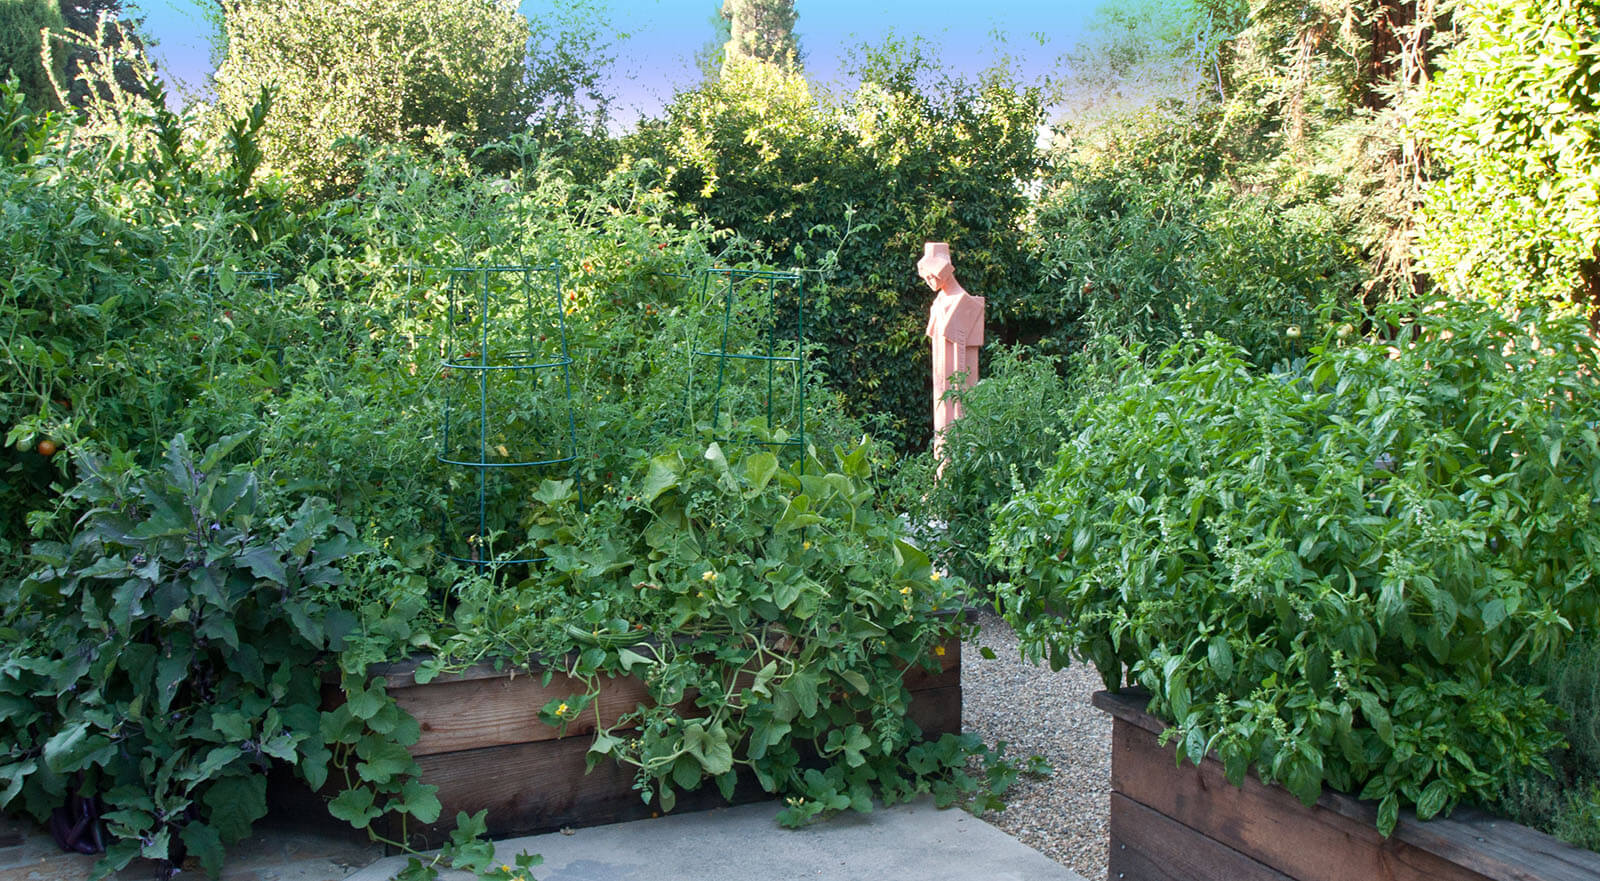 Harvest - This garden exploded in its raised beds, gorgeous